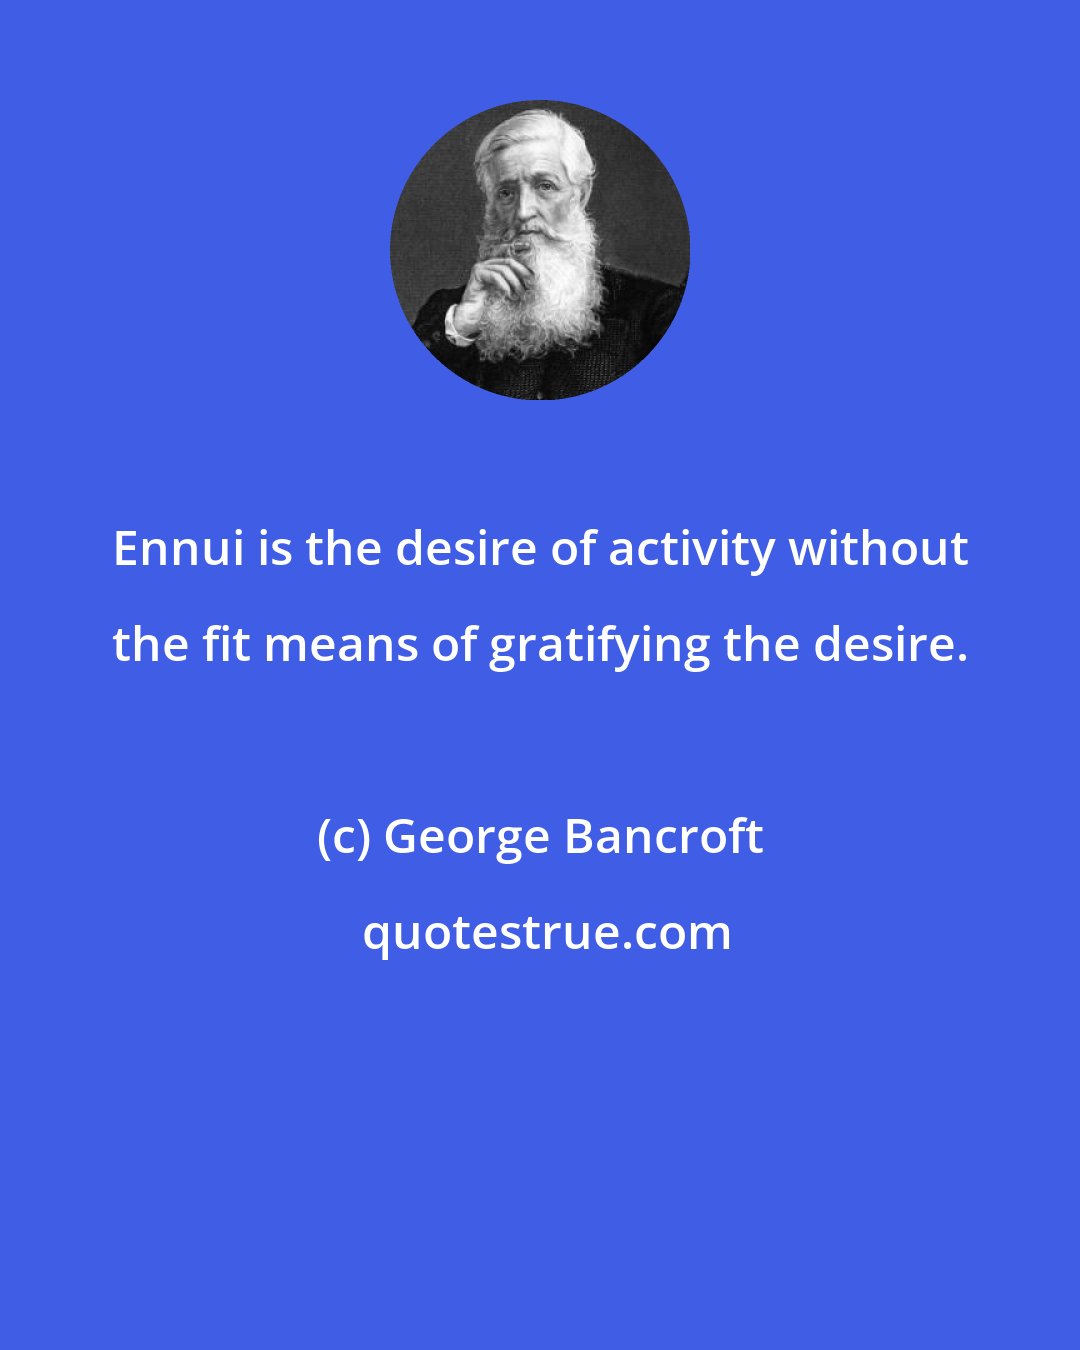 George Bancroft: Ennui is the desire of activity without the fit means of gratifying the desire.